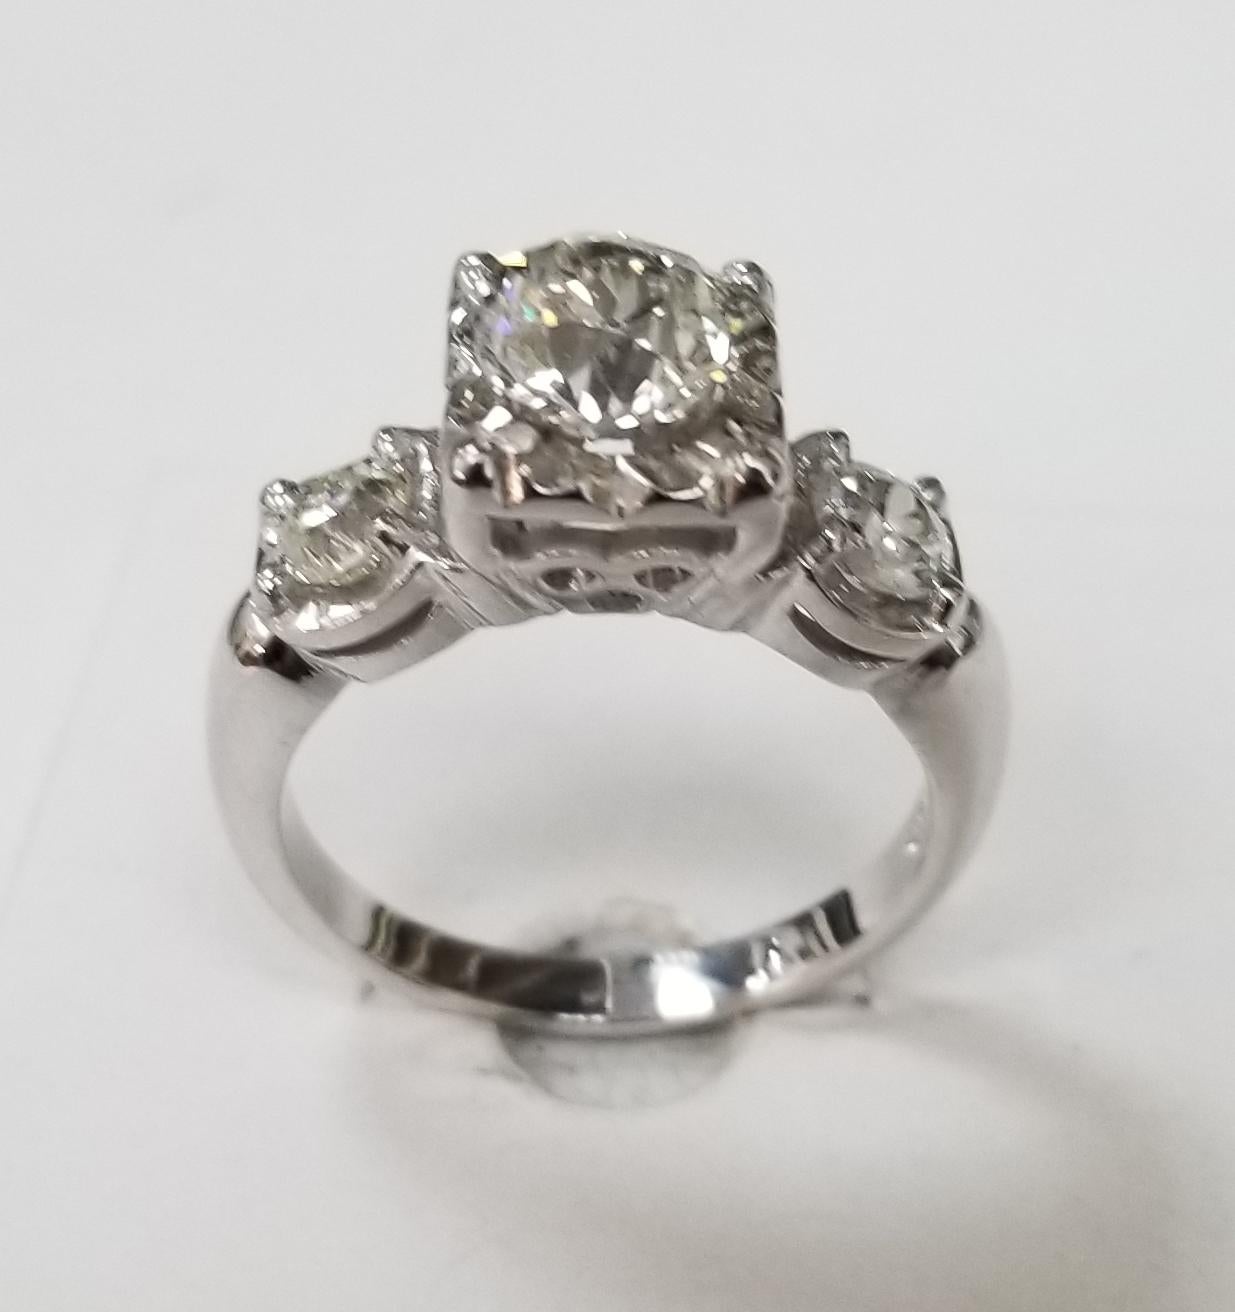 Vintage Old Euro Cut 3 stone ring total weight 1.27cts., containing 3 euro cut diamond; color H  with 2 side euro cut diamonds . the ring is size 6 and can be sized to fit for free.